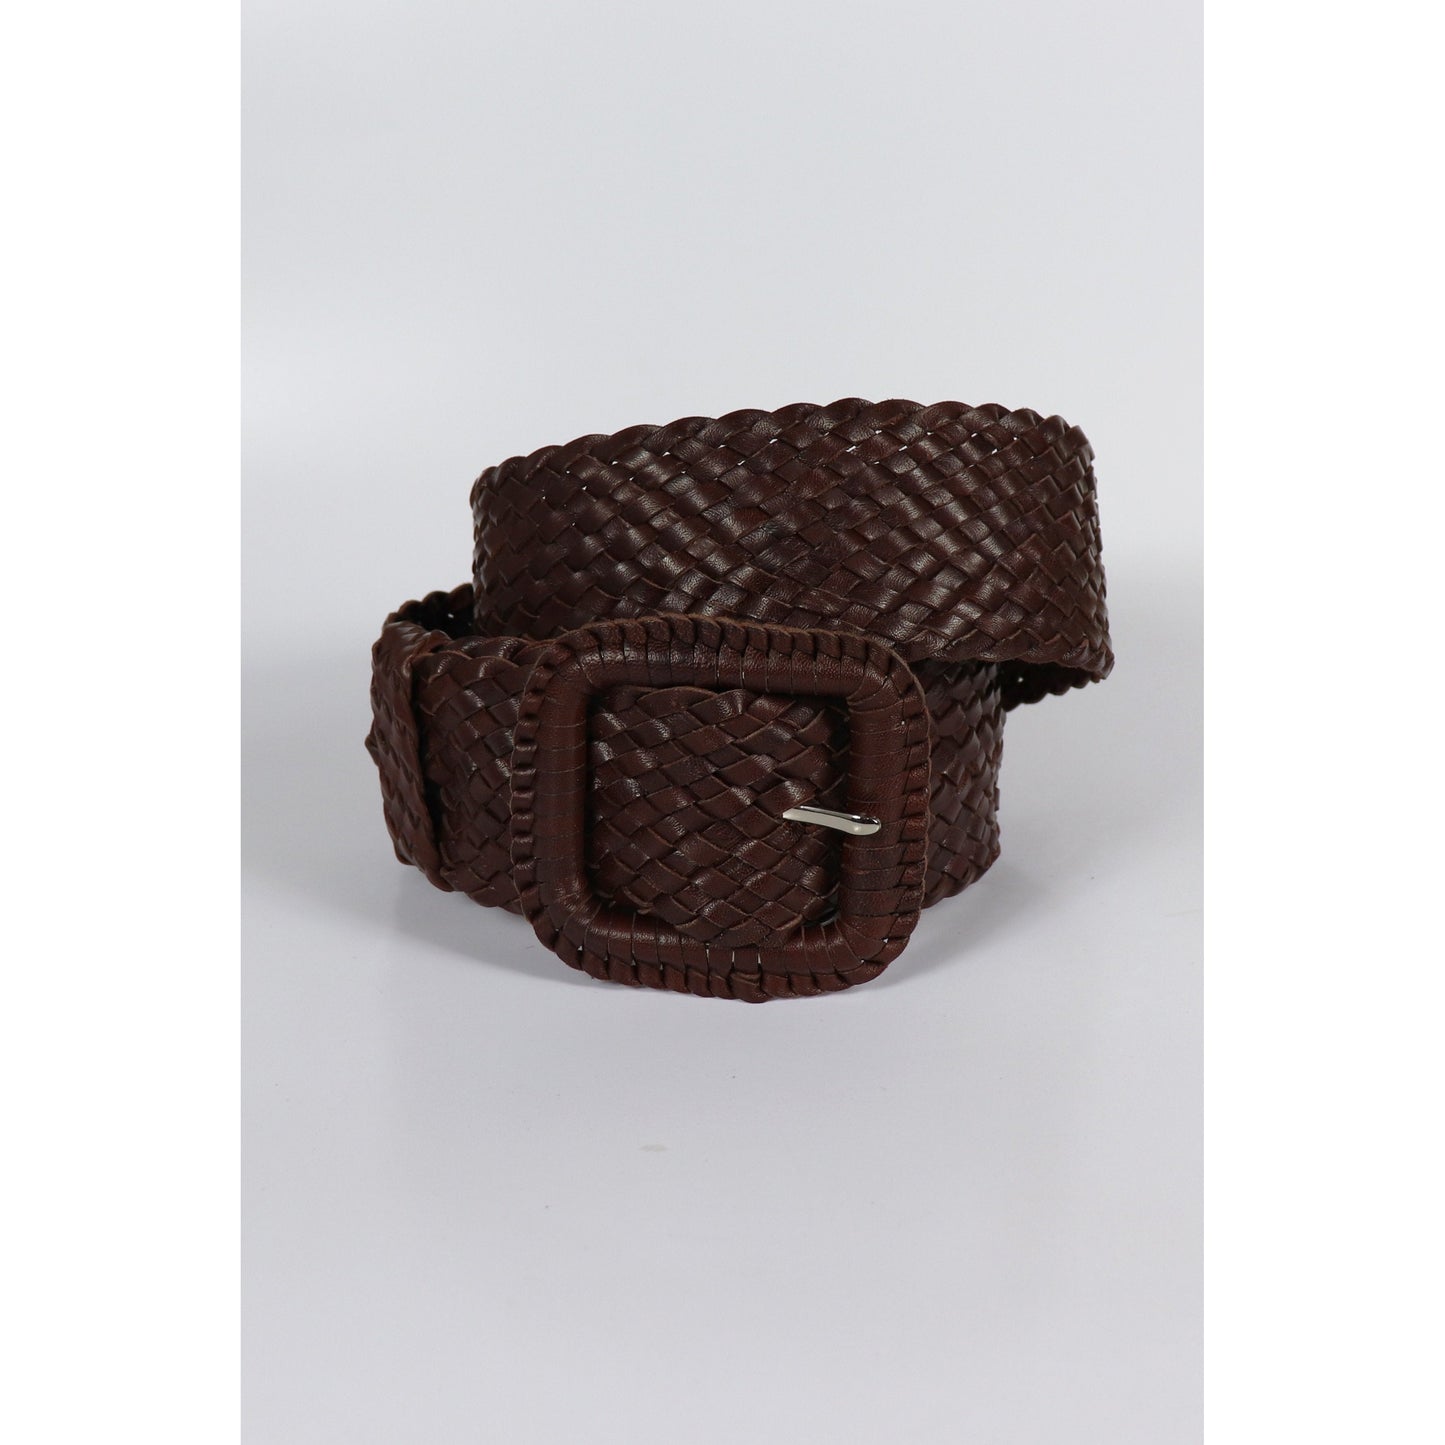 Brown woven leather belt coiled.